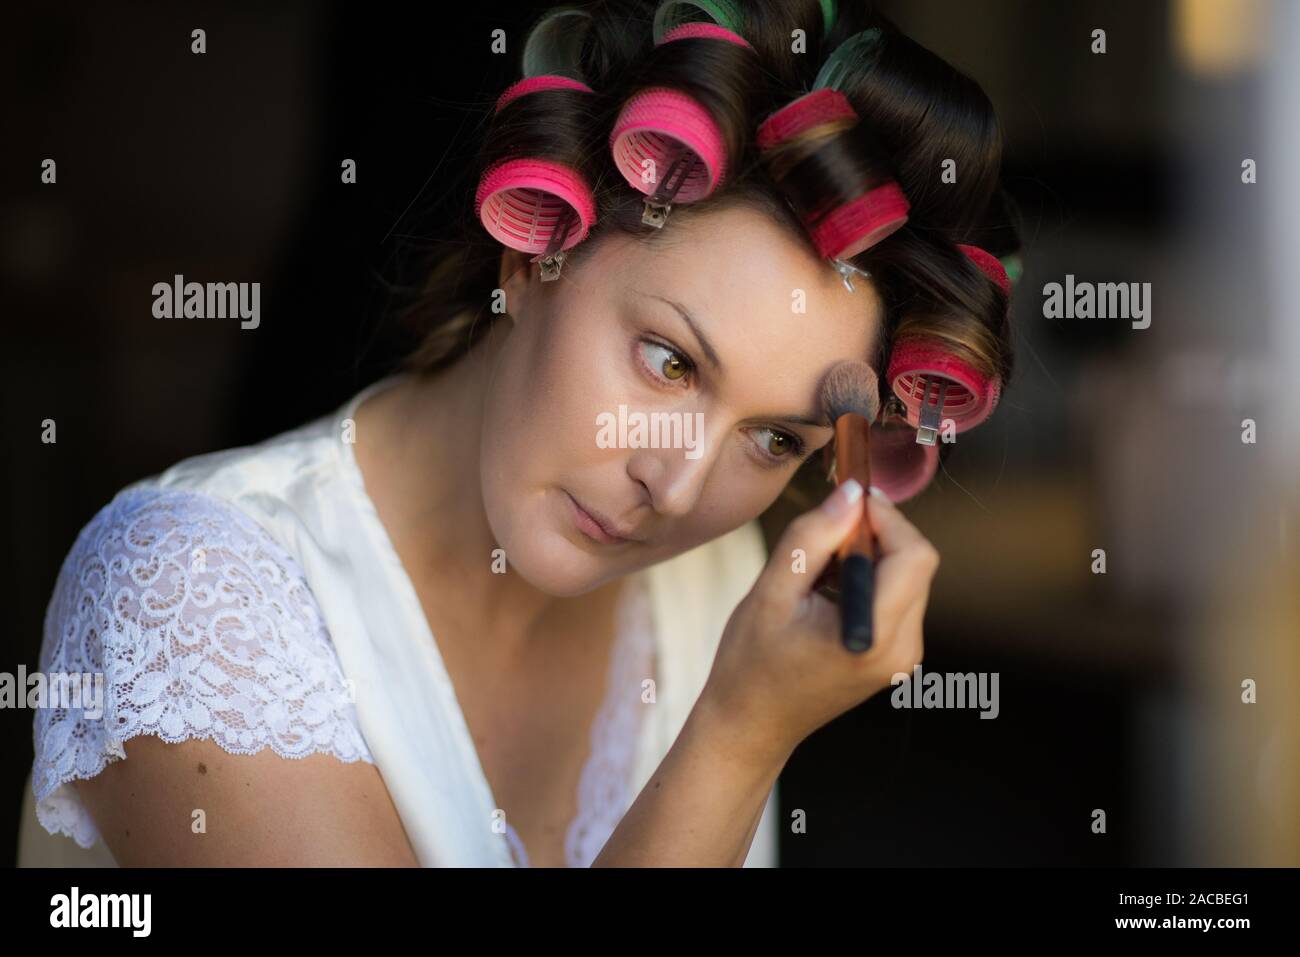 A beautiful bride to be getting ready during bridal preparation on the morning of her wedding day. Having her hair and makeup done, finishing touches Stock Photo